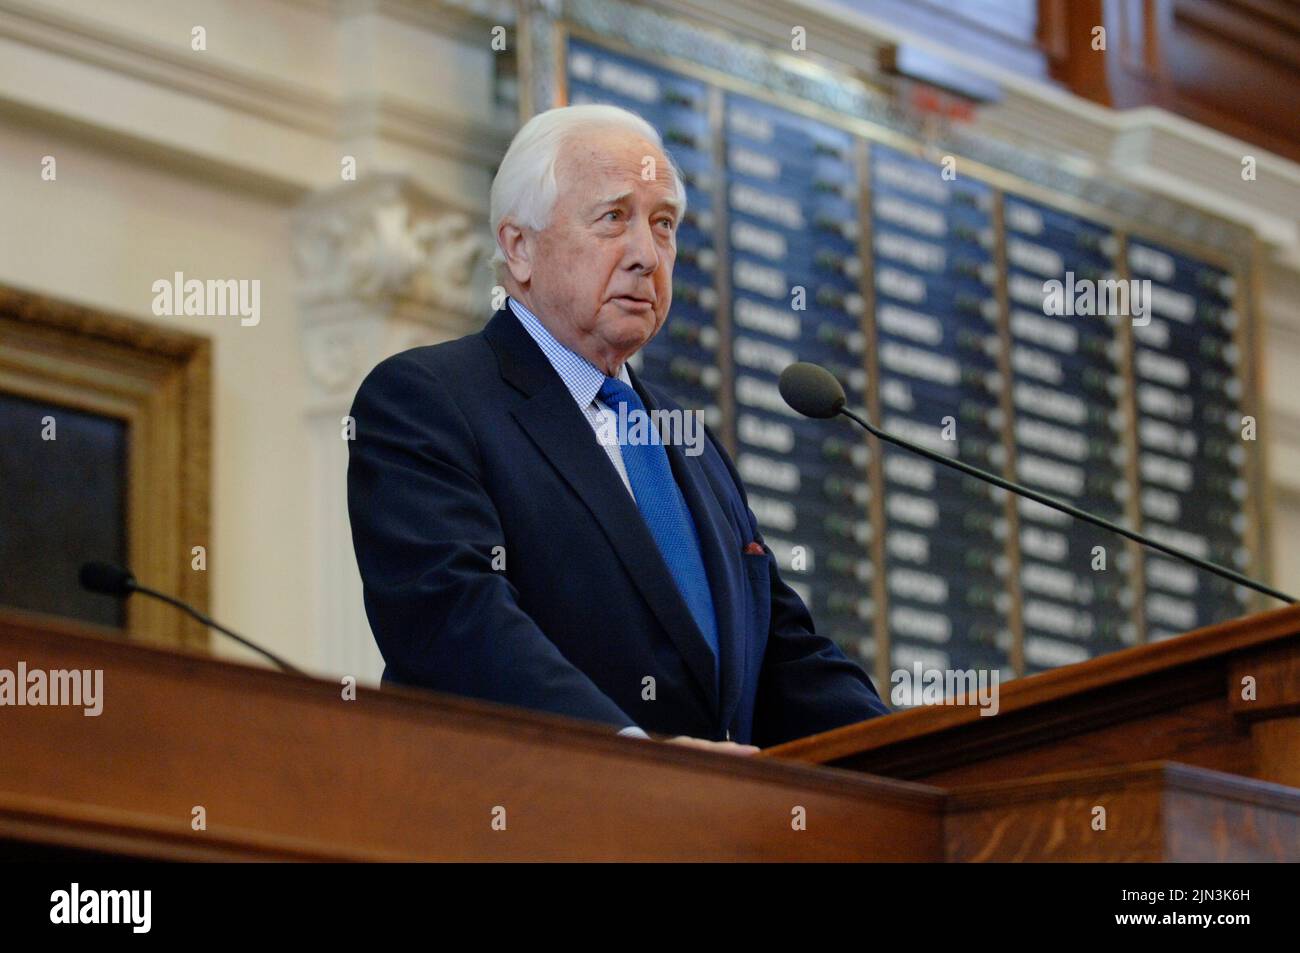 Author DAVID MCCULLOUGH, two-time Pulitzer Prize and National Book Award winner, whose best-selling biographies of Harry Truman and John Adams made him one of America’s most popular and acclaimed historians, died on Aug. 7, 2022, at age 89. McCullough, who won the prizes for biographies on Truman (1992) and Adams (2001), is pictured speaking at the Texas Capitol when he was a featured author at the 2005 Texas Book Festival in Austin. ©Bob Daemmrich Stock Photo